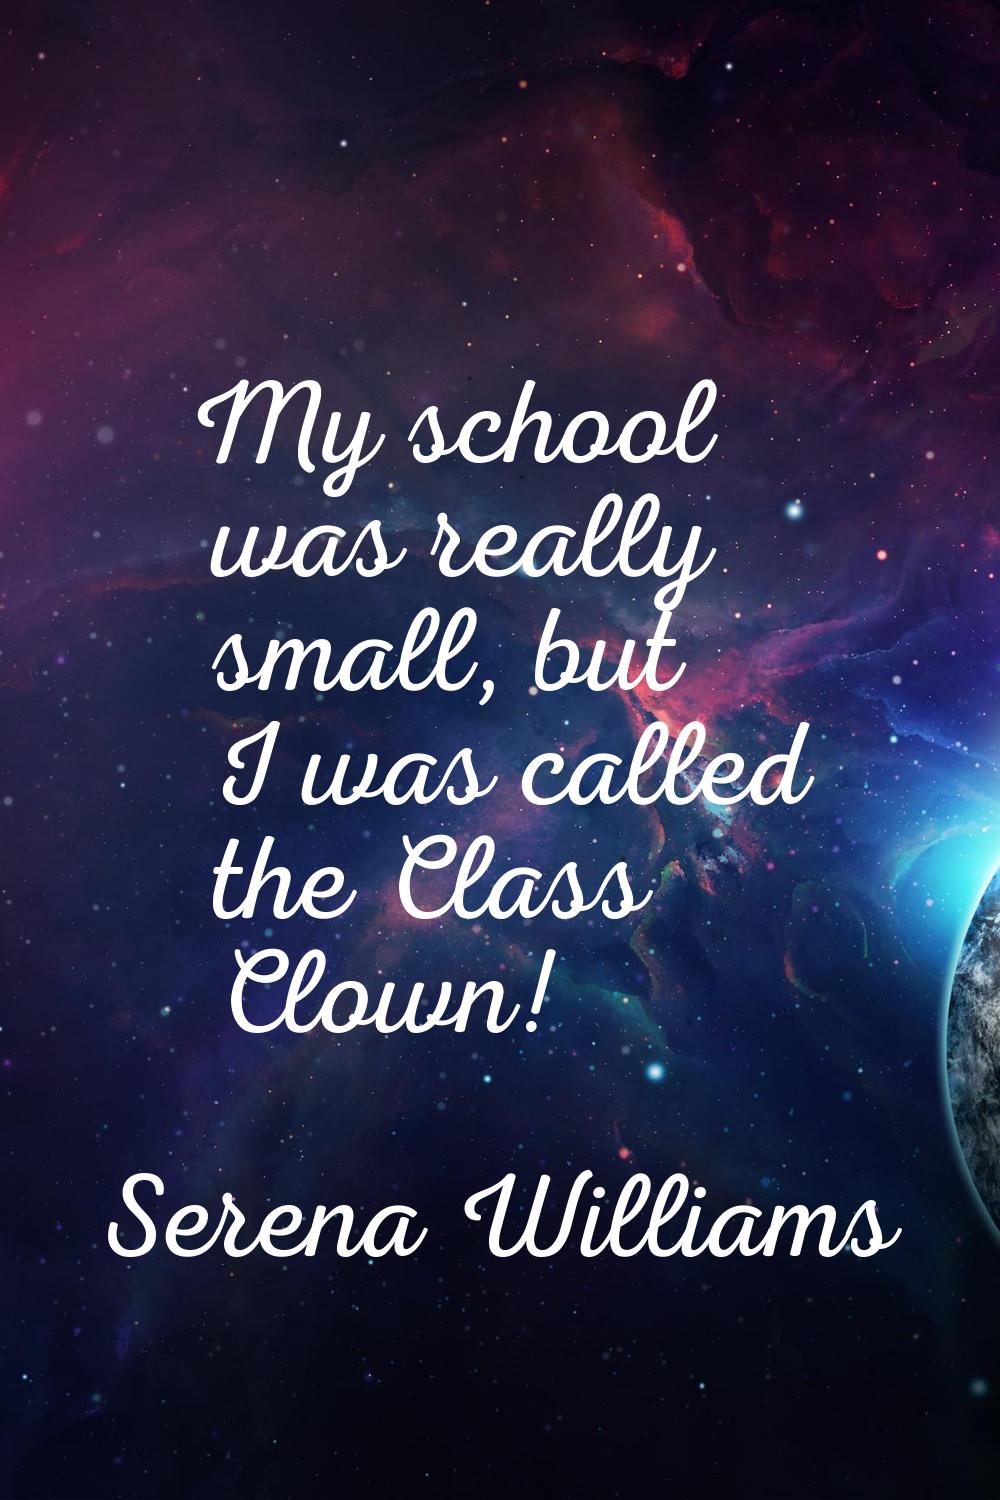 My school was really small, but I was called the Class Clown!